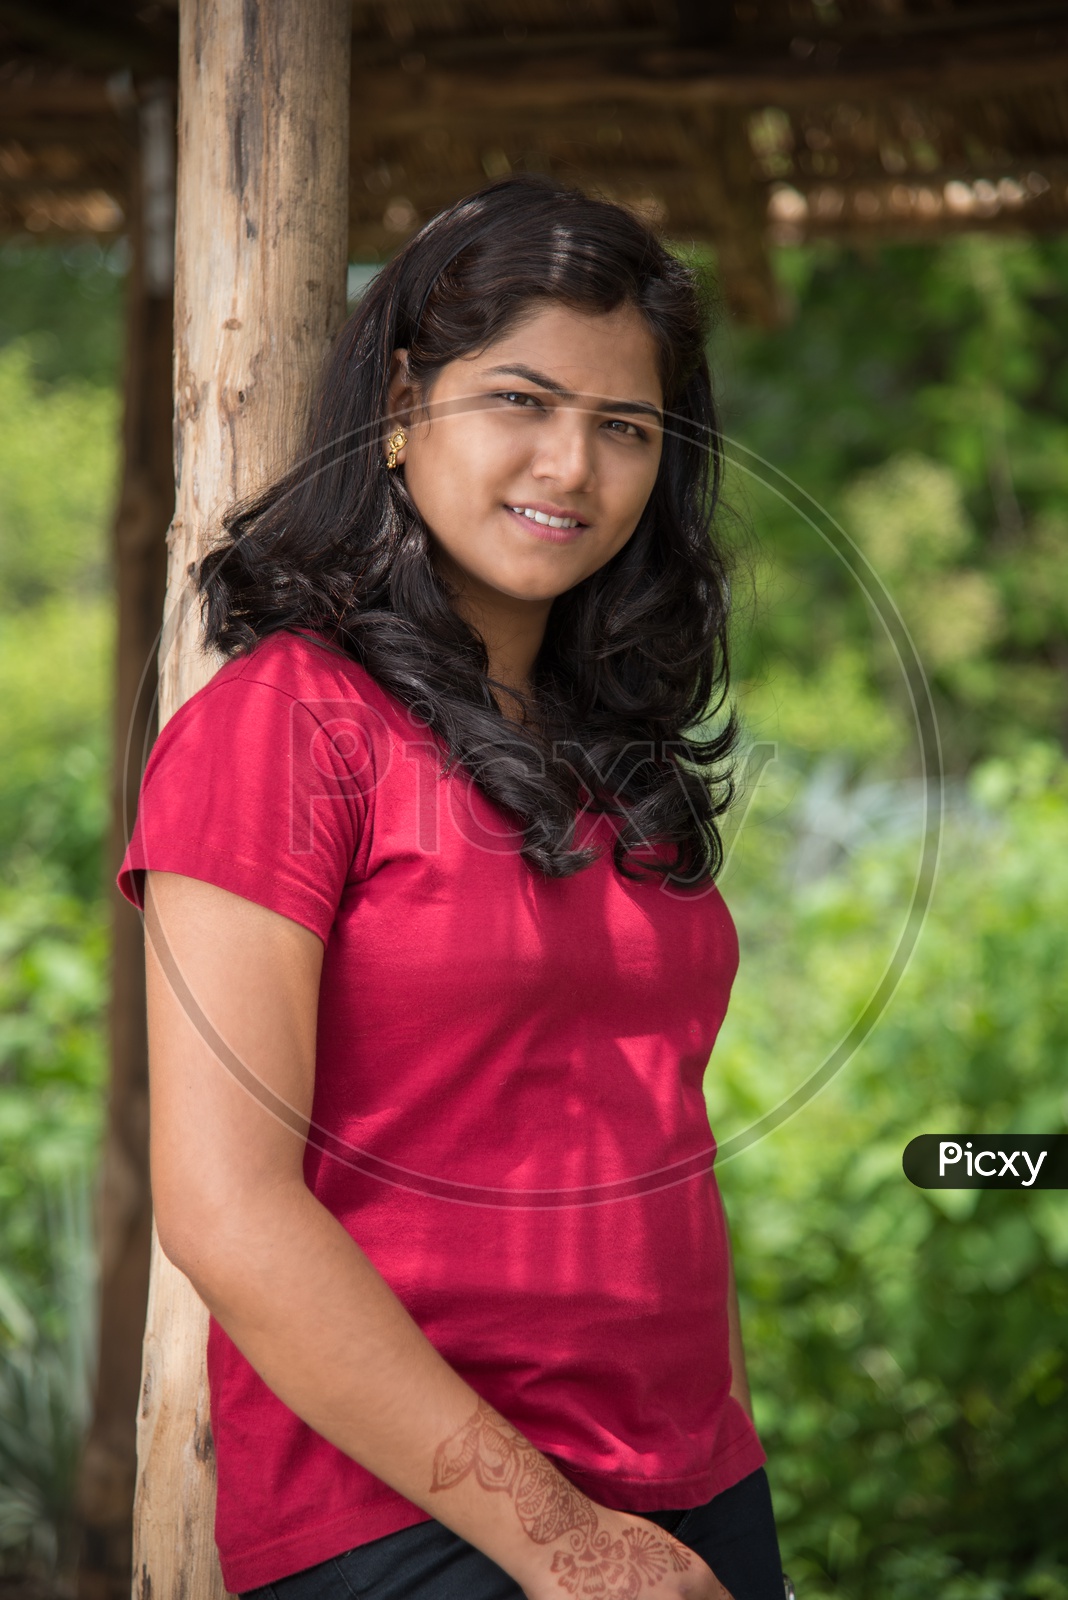 Portrait Of a Young Indian Beautiful Woman Posing In Outdoor Or In a Park Background Portrait Of a Young Indian Beautiful Woman Posing In Outdoor Or In a Park Background